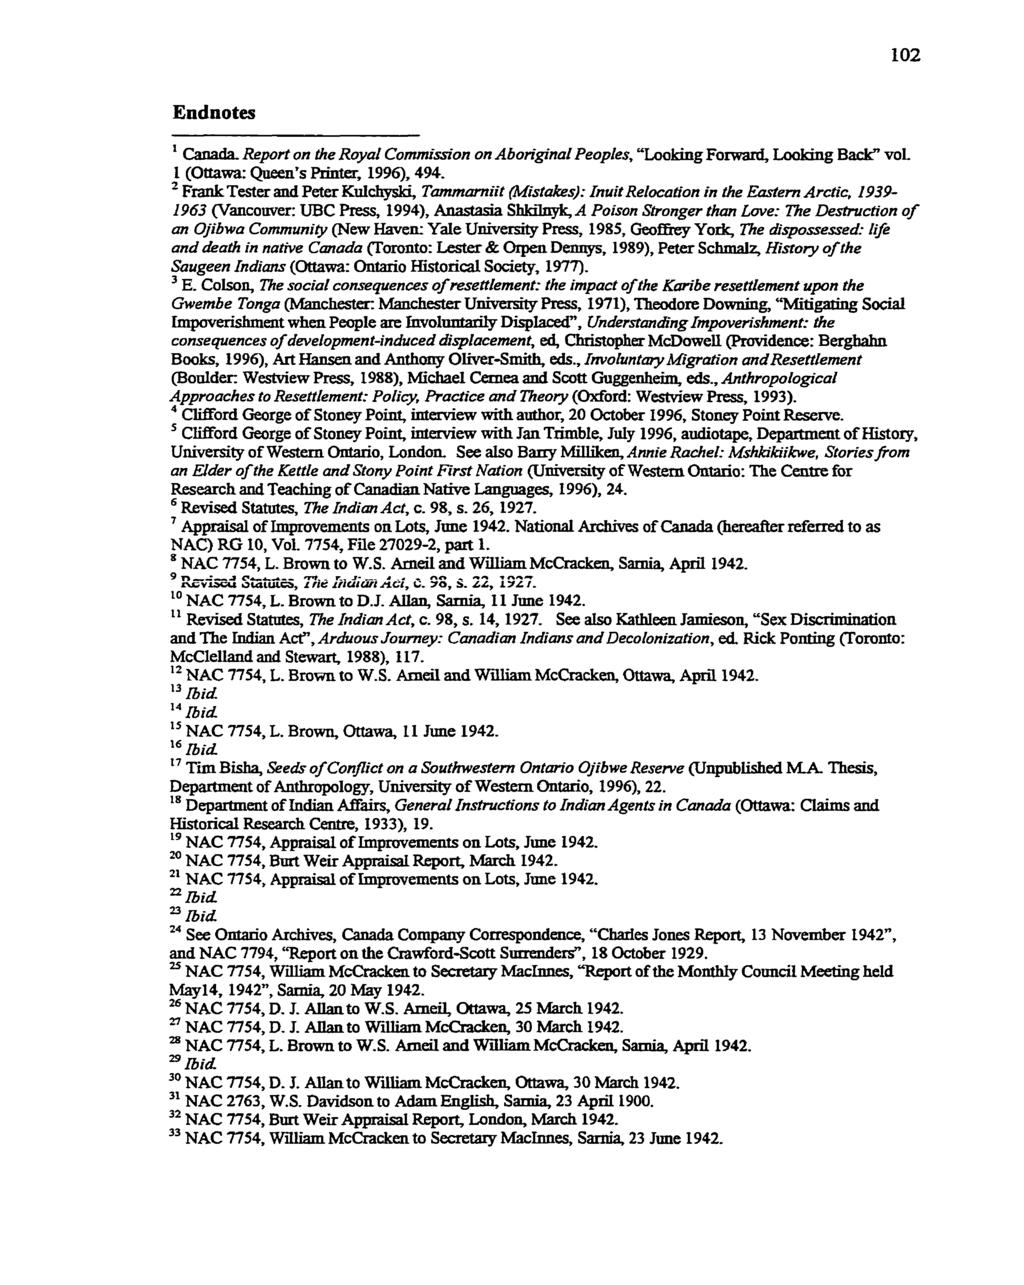 Endnotes 1 Canada Report on the Royal Commission on Abonginal Peoples, "Looking Forward, Loakmg Back" VOL 1 (Ottawa: Qneen's Printer, 1996), 494.